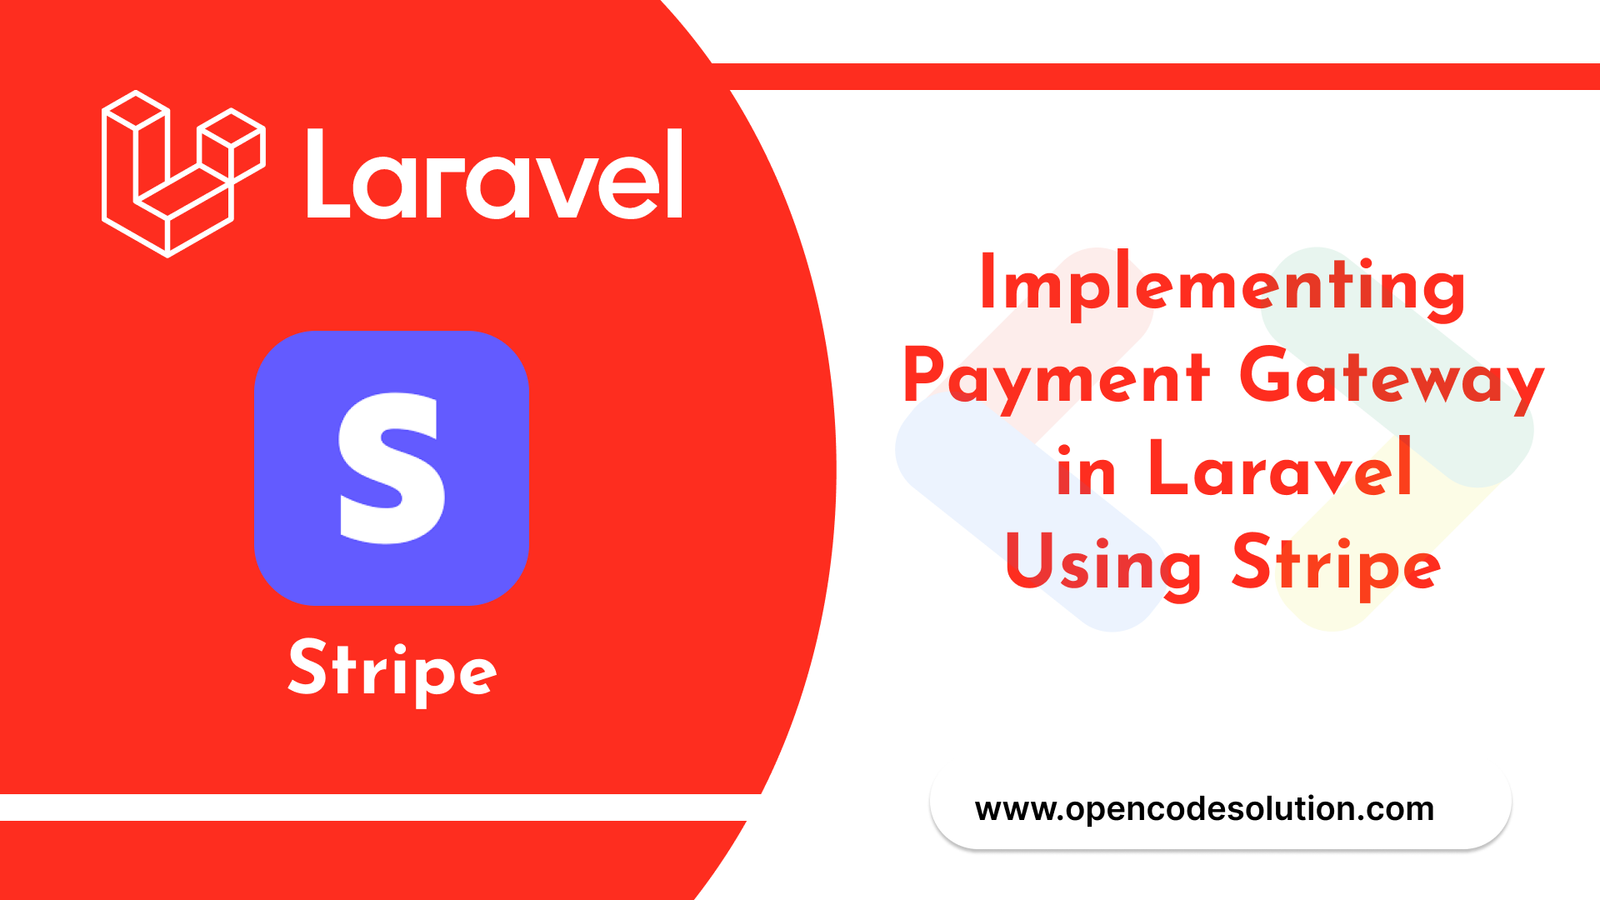 Implementing Payment Gateway in Laravel Using Stripe